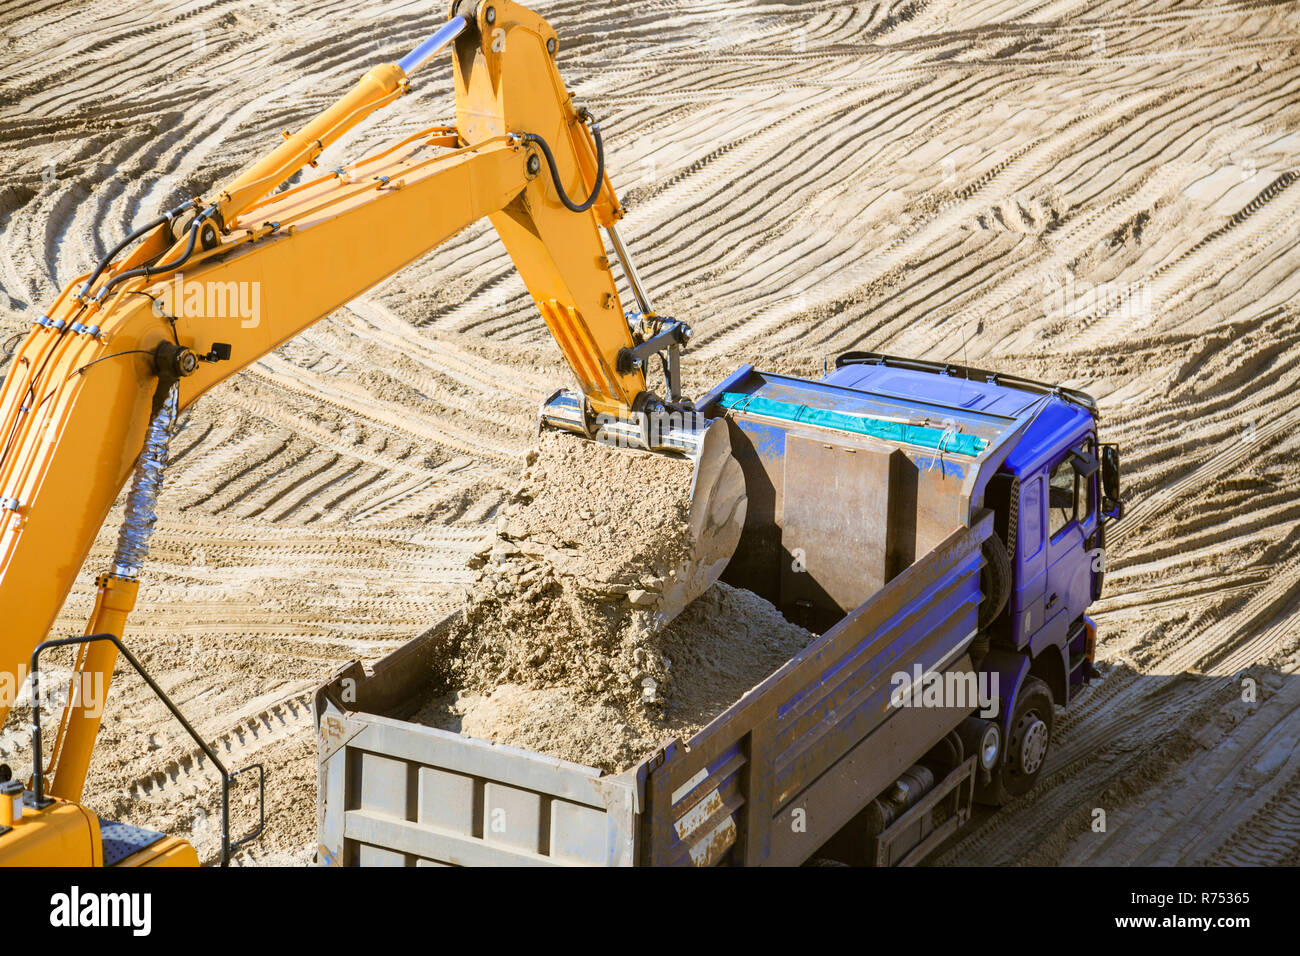 Work of the excavator and truck at a sand quarry. Excavator loading sand into a dump truck. Stock Photo